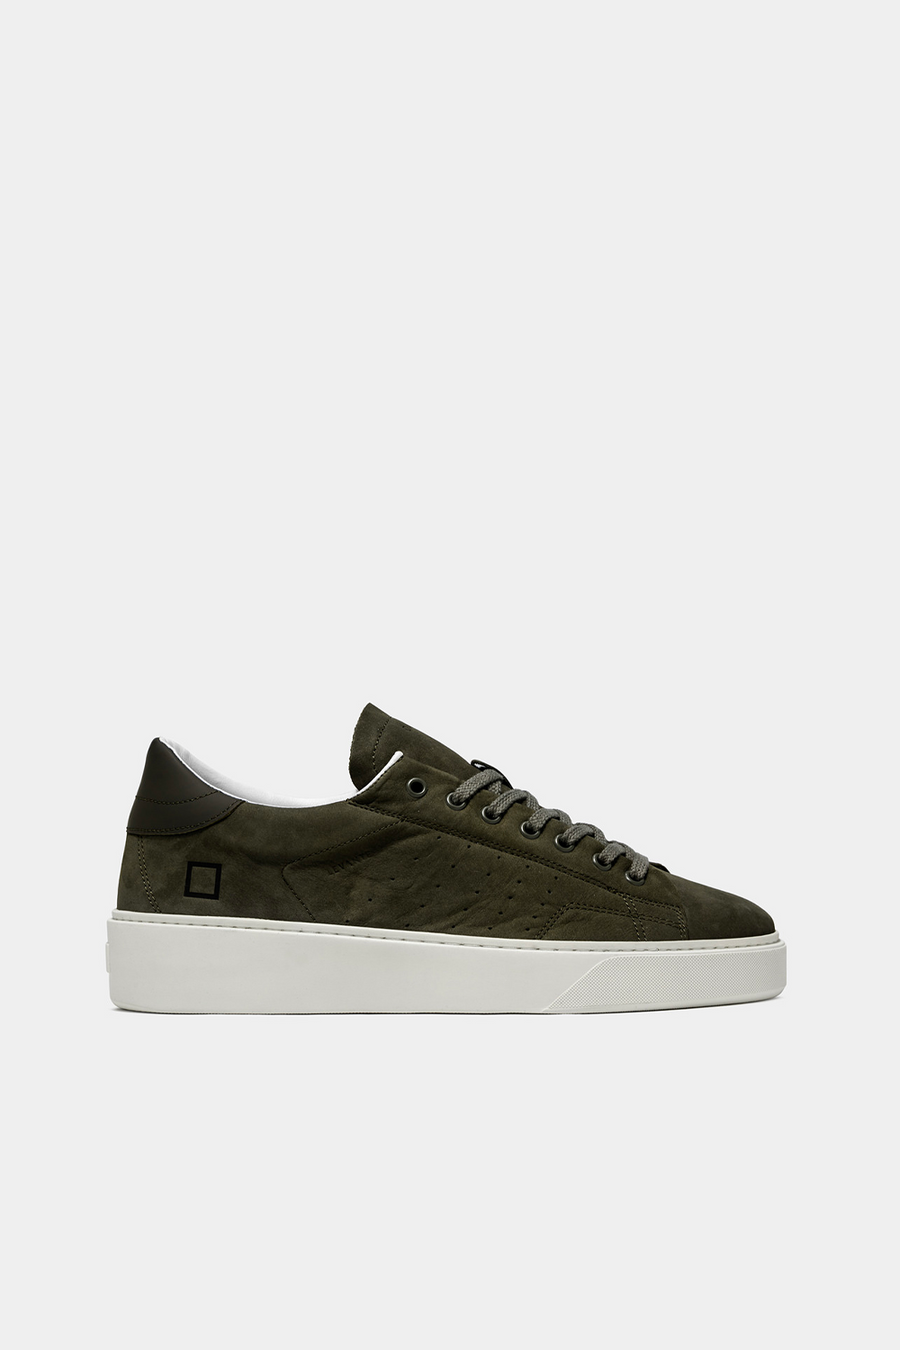 Buy the D.A.T.E. Levante Nabuk Sneaker in Army at Intro. Spend £50 for free UK delivery. Official stockists. We ship worldwide.